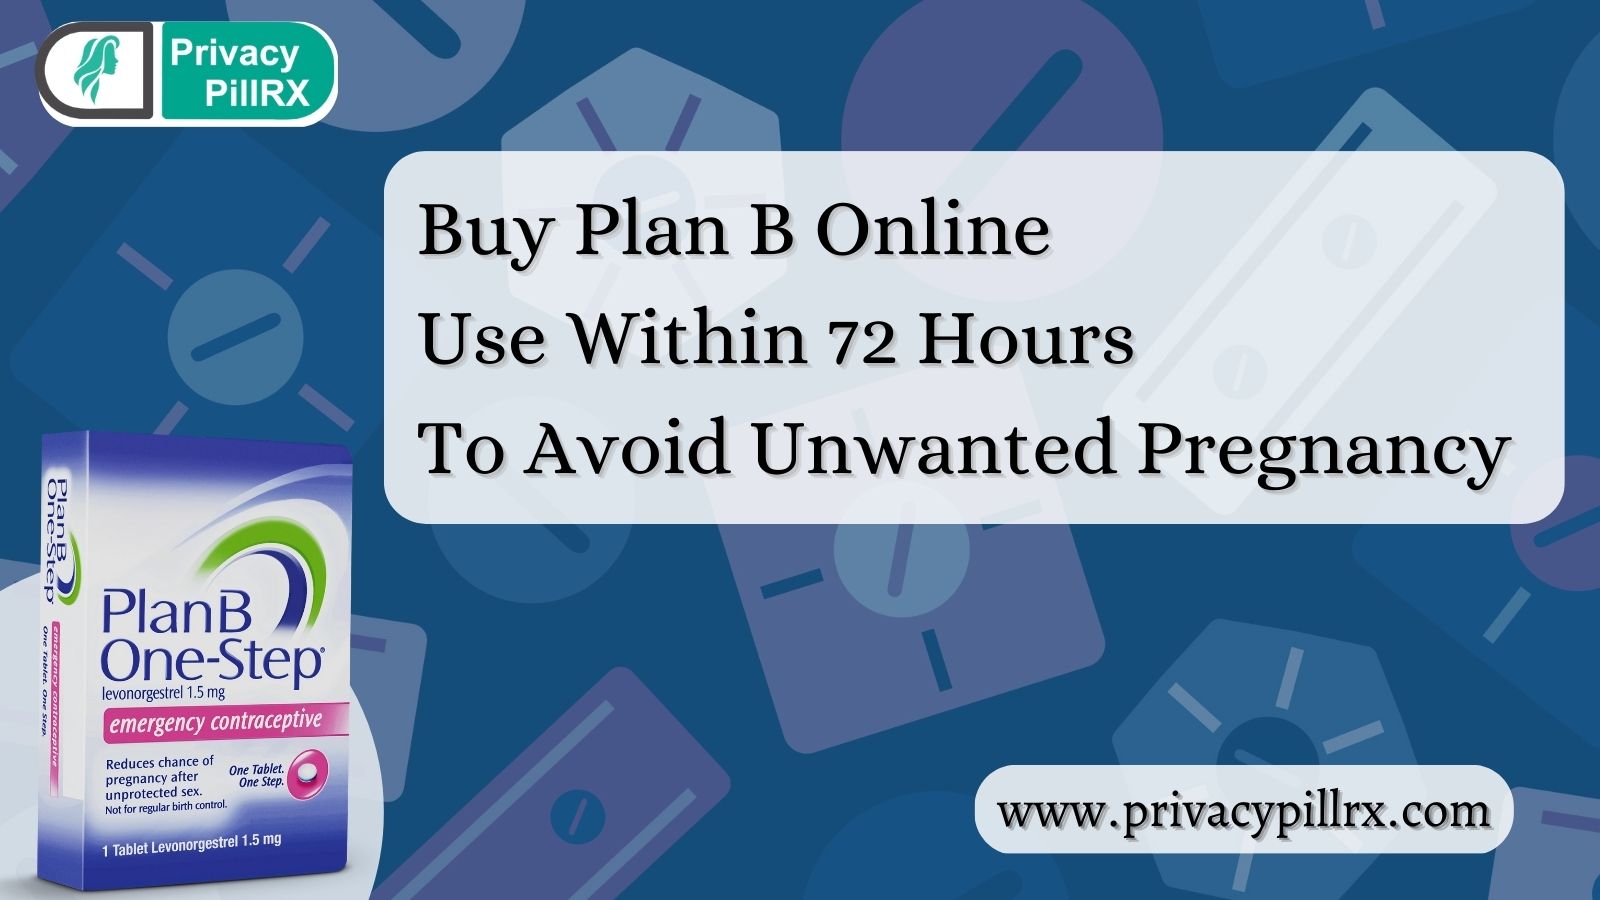 Buy Plan B Online with Use in 72 Hours to Avoid a Pregnancy - photo